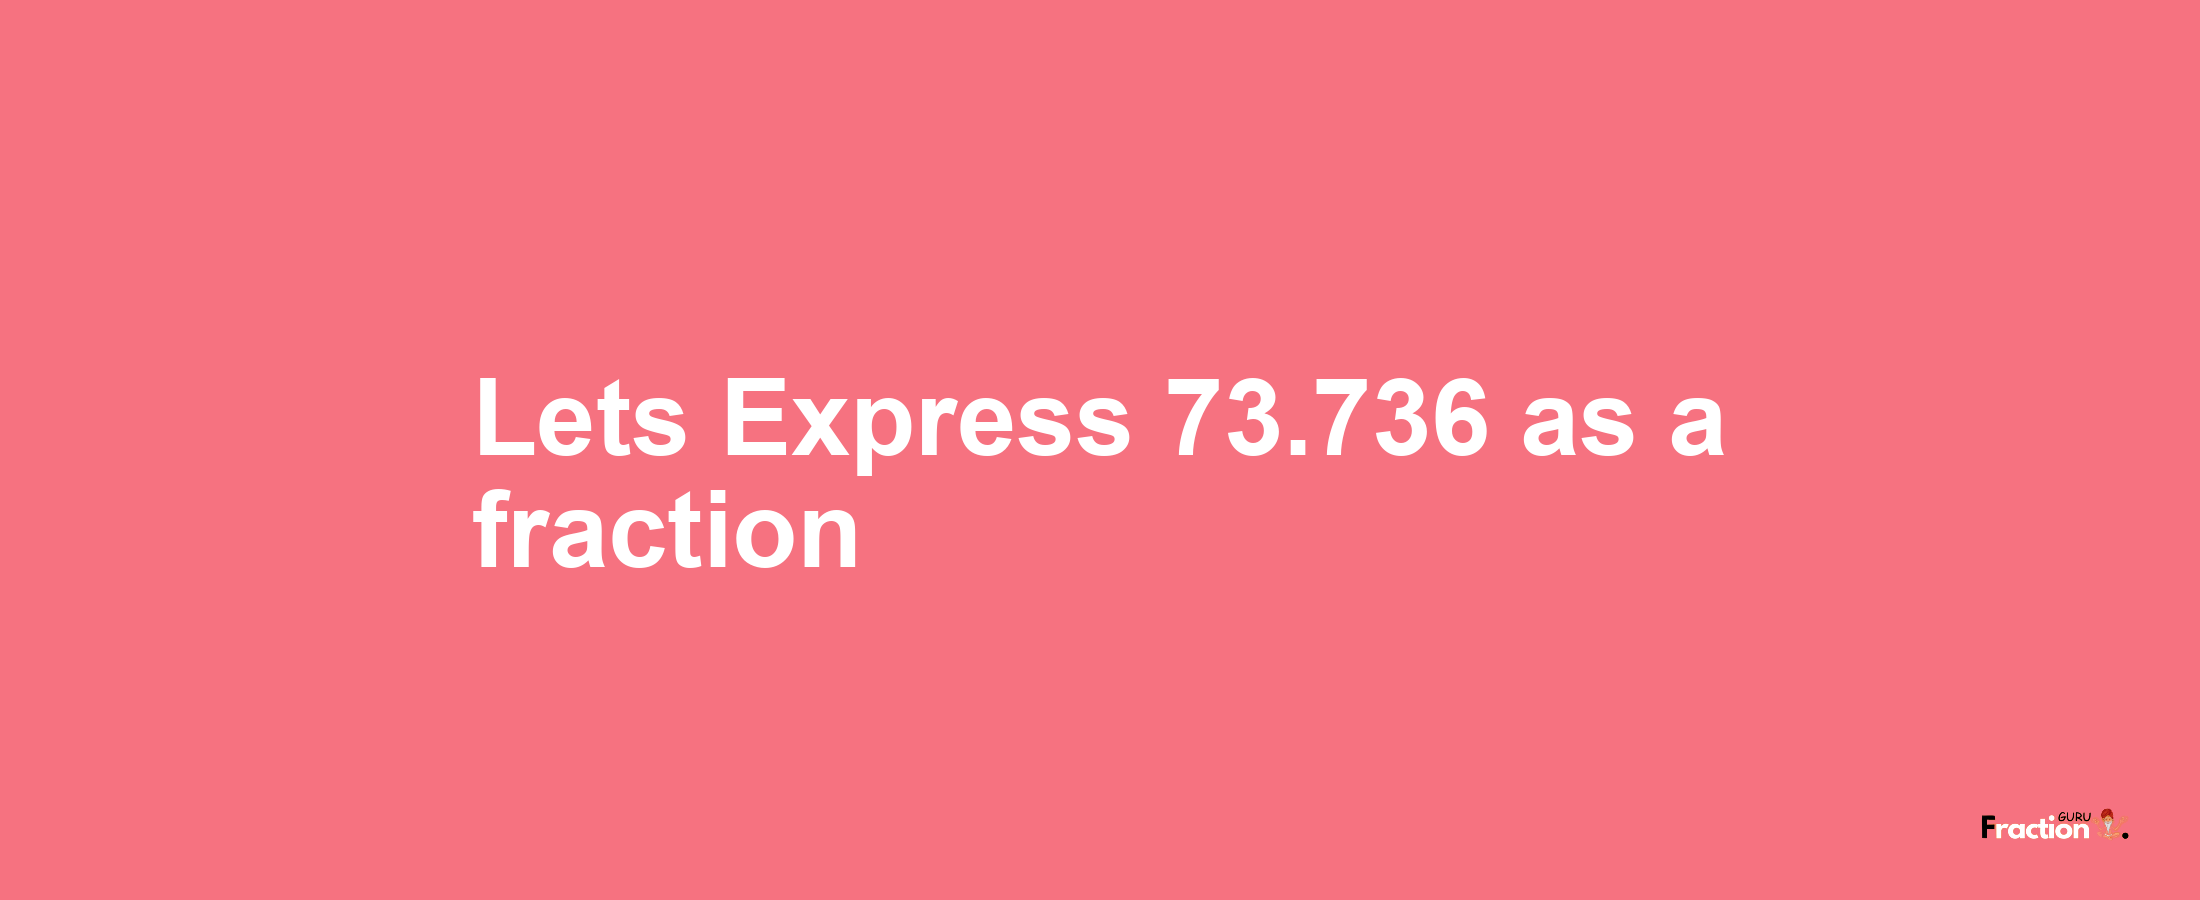 Lets Express 73.736 as afraction